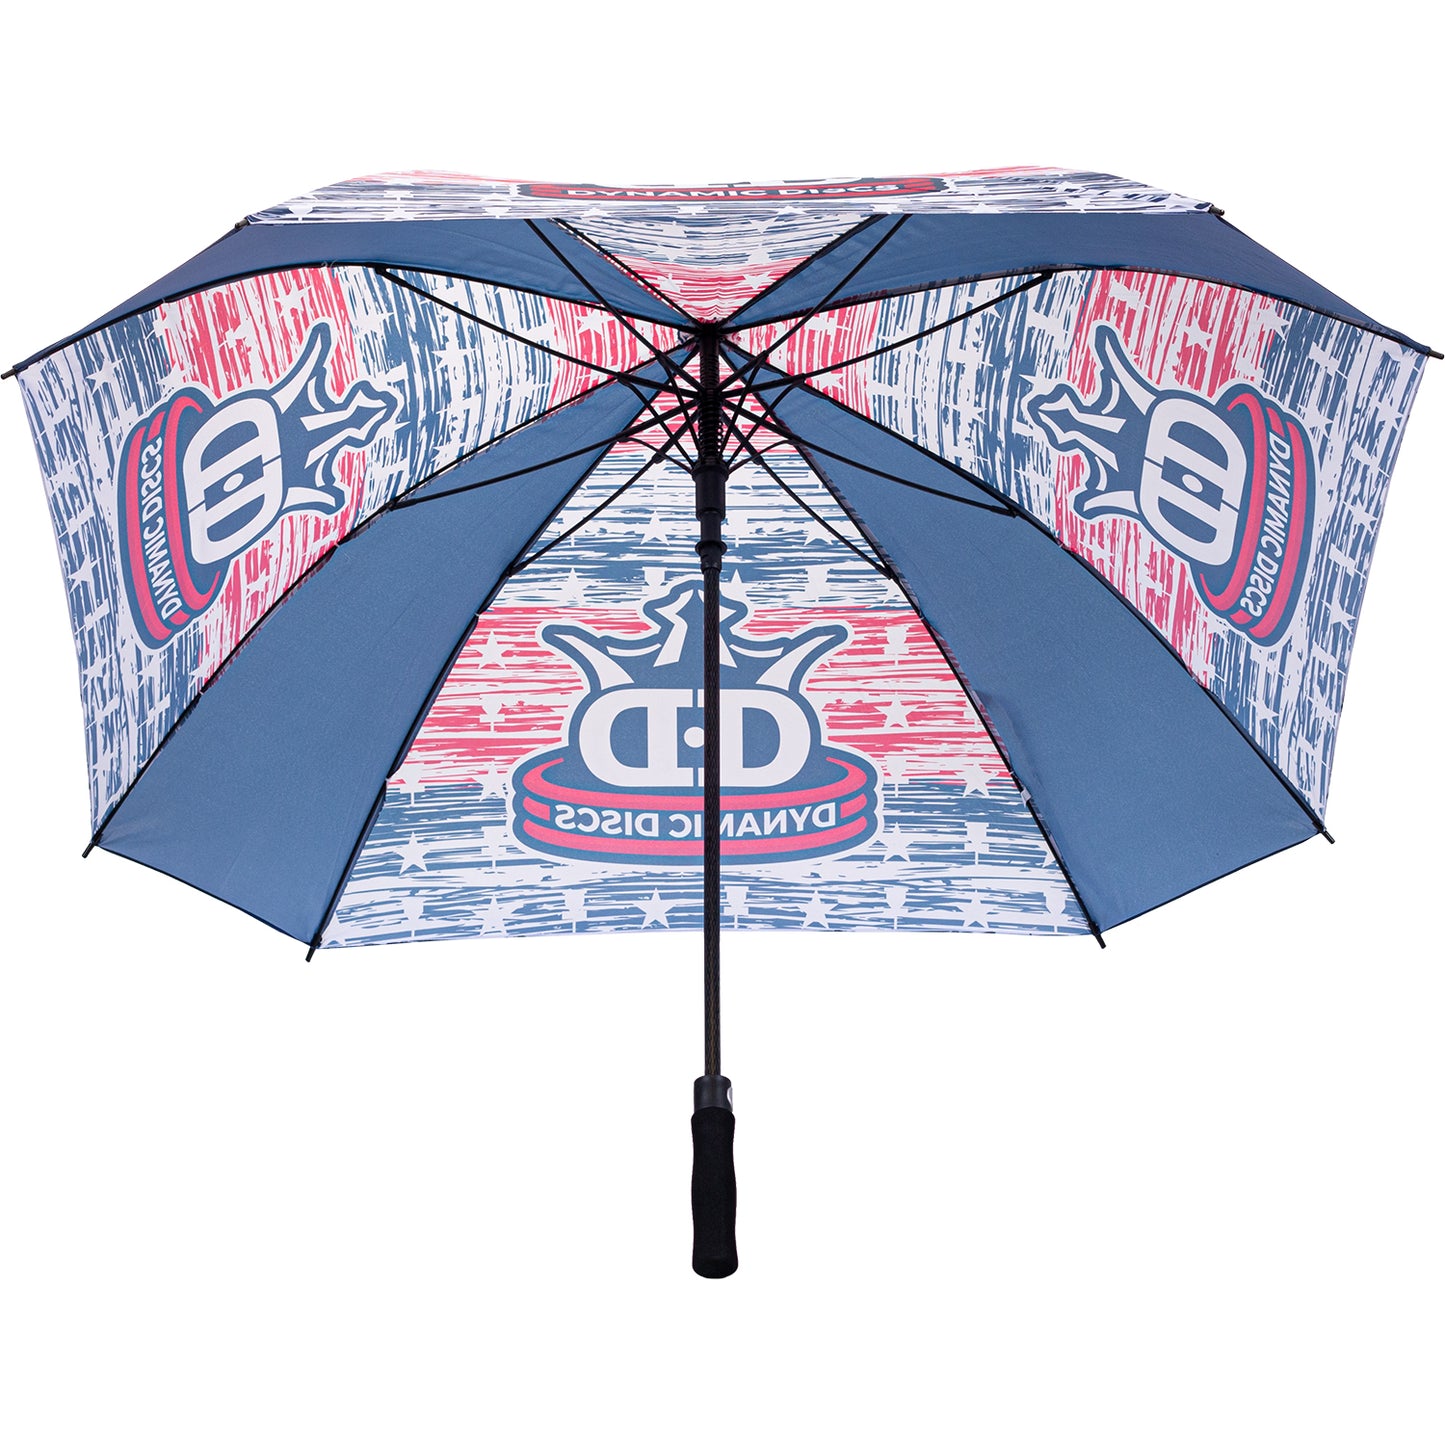 Dynamic Discs 60" ARC Umbrella - Scratched Red and Blue